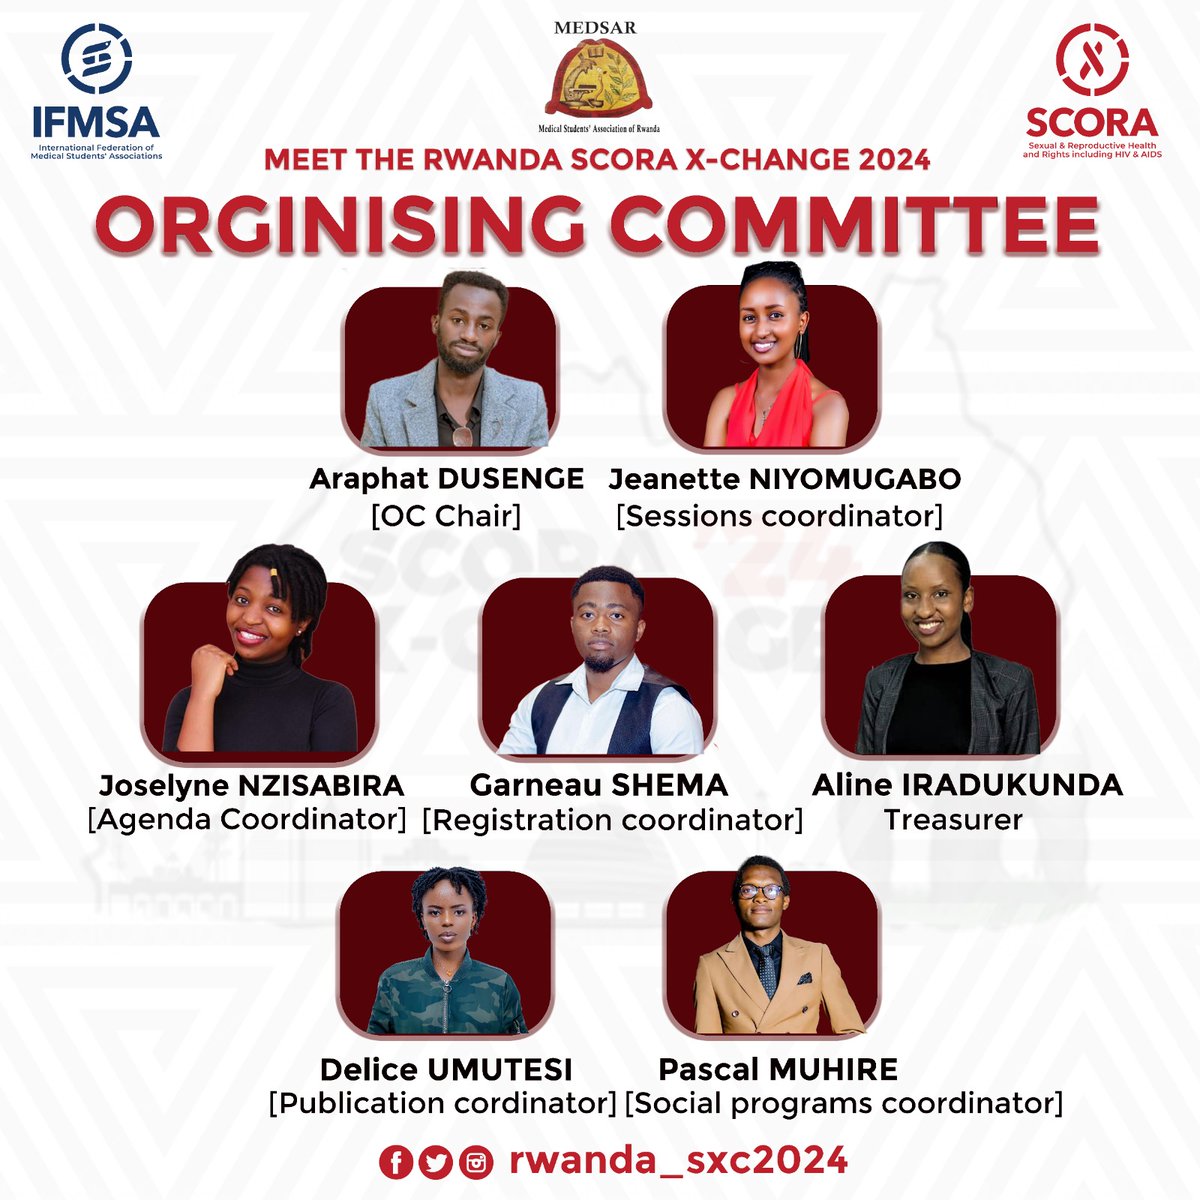 ✨ Meet with @rwanda_sxc2024 Organizing Committee! Dear members, partners, medical students worldwide! We are excited to present to you the organising commitee of the upcoming amazing event #RwandaScoraXChange2024🤗 Good luck and have Successful preparations team. #RSXC2024